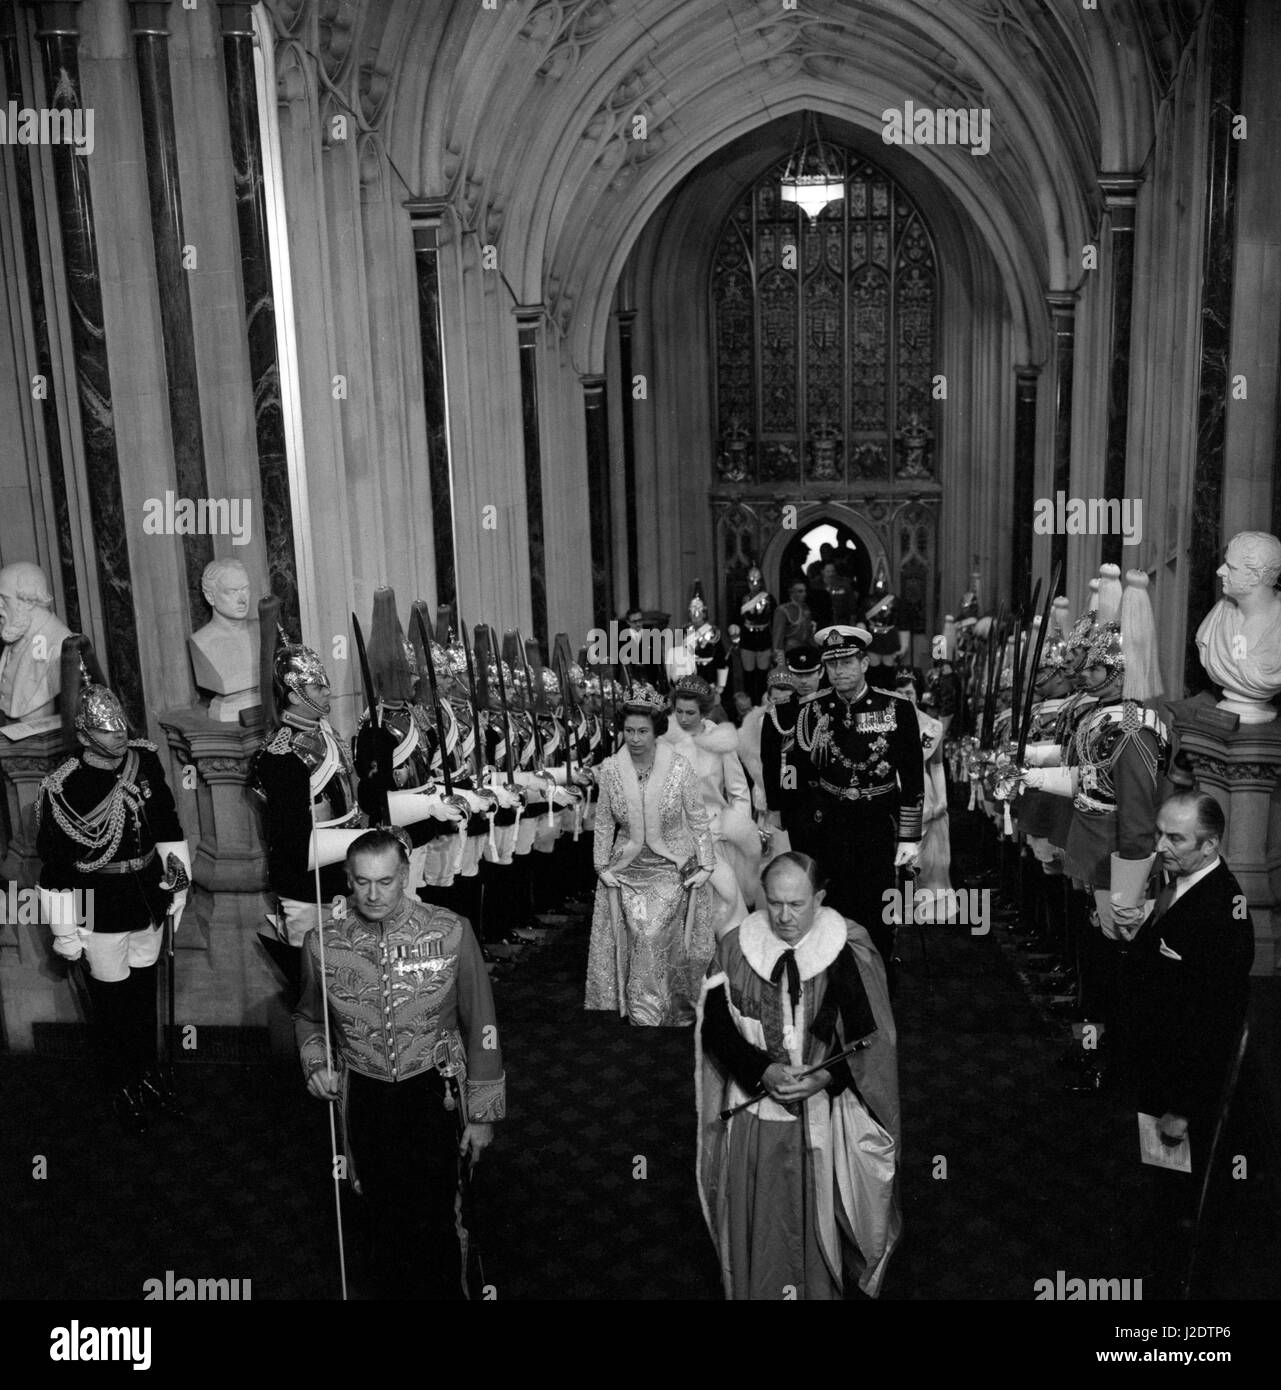 Wearing a golden tissue gown and a silver tissue coat, Queen Elizabeth II accompanied by Prince Philip, the Duke of Edinburgh, and followed by Princess Anne and Captain Mark Phillips, climbs the Norman Porch stairs of the Palace of Westminster for the robing room and the State Opening of Parliament. Stock Photo